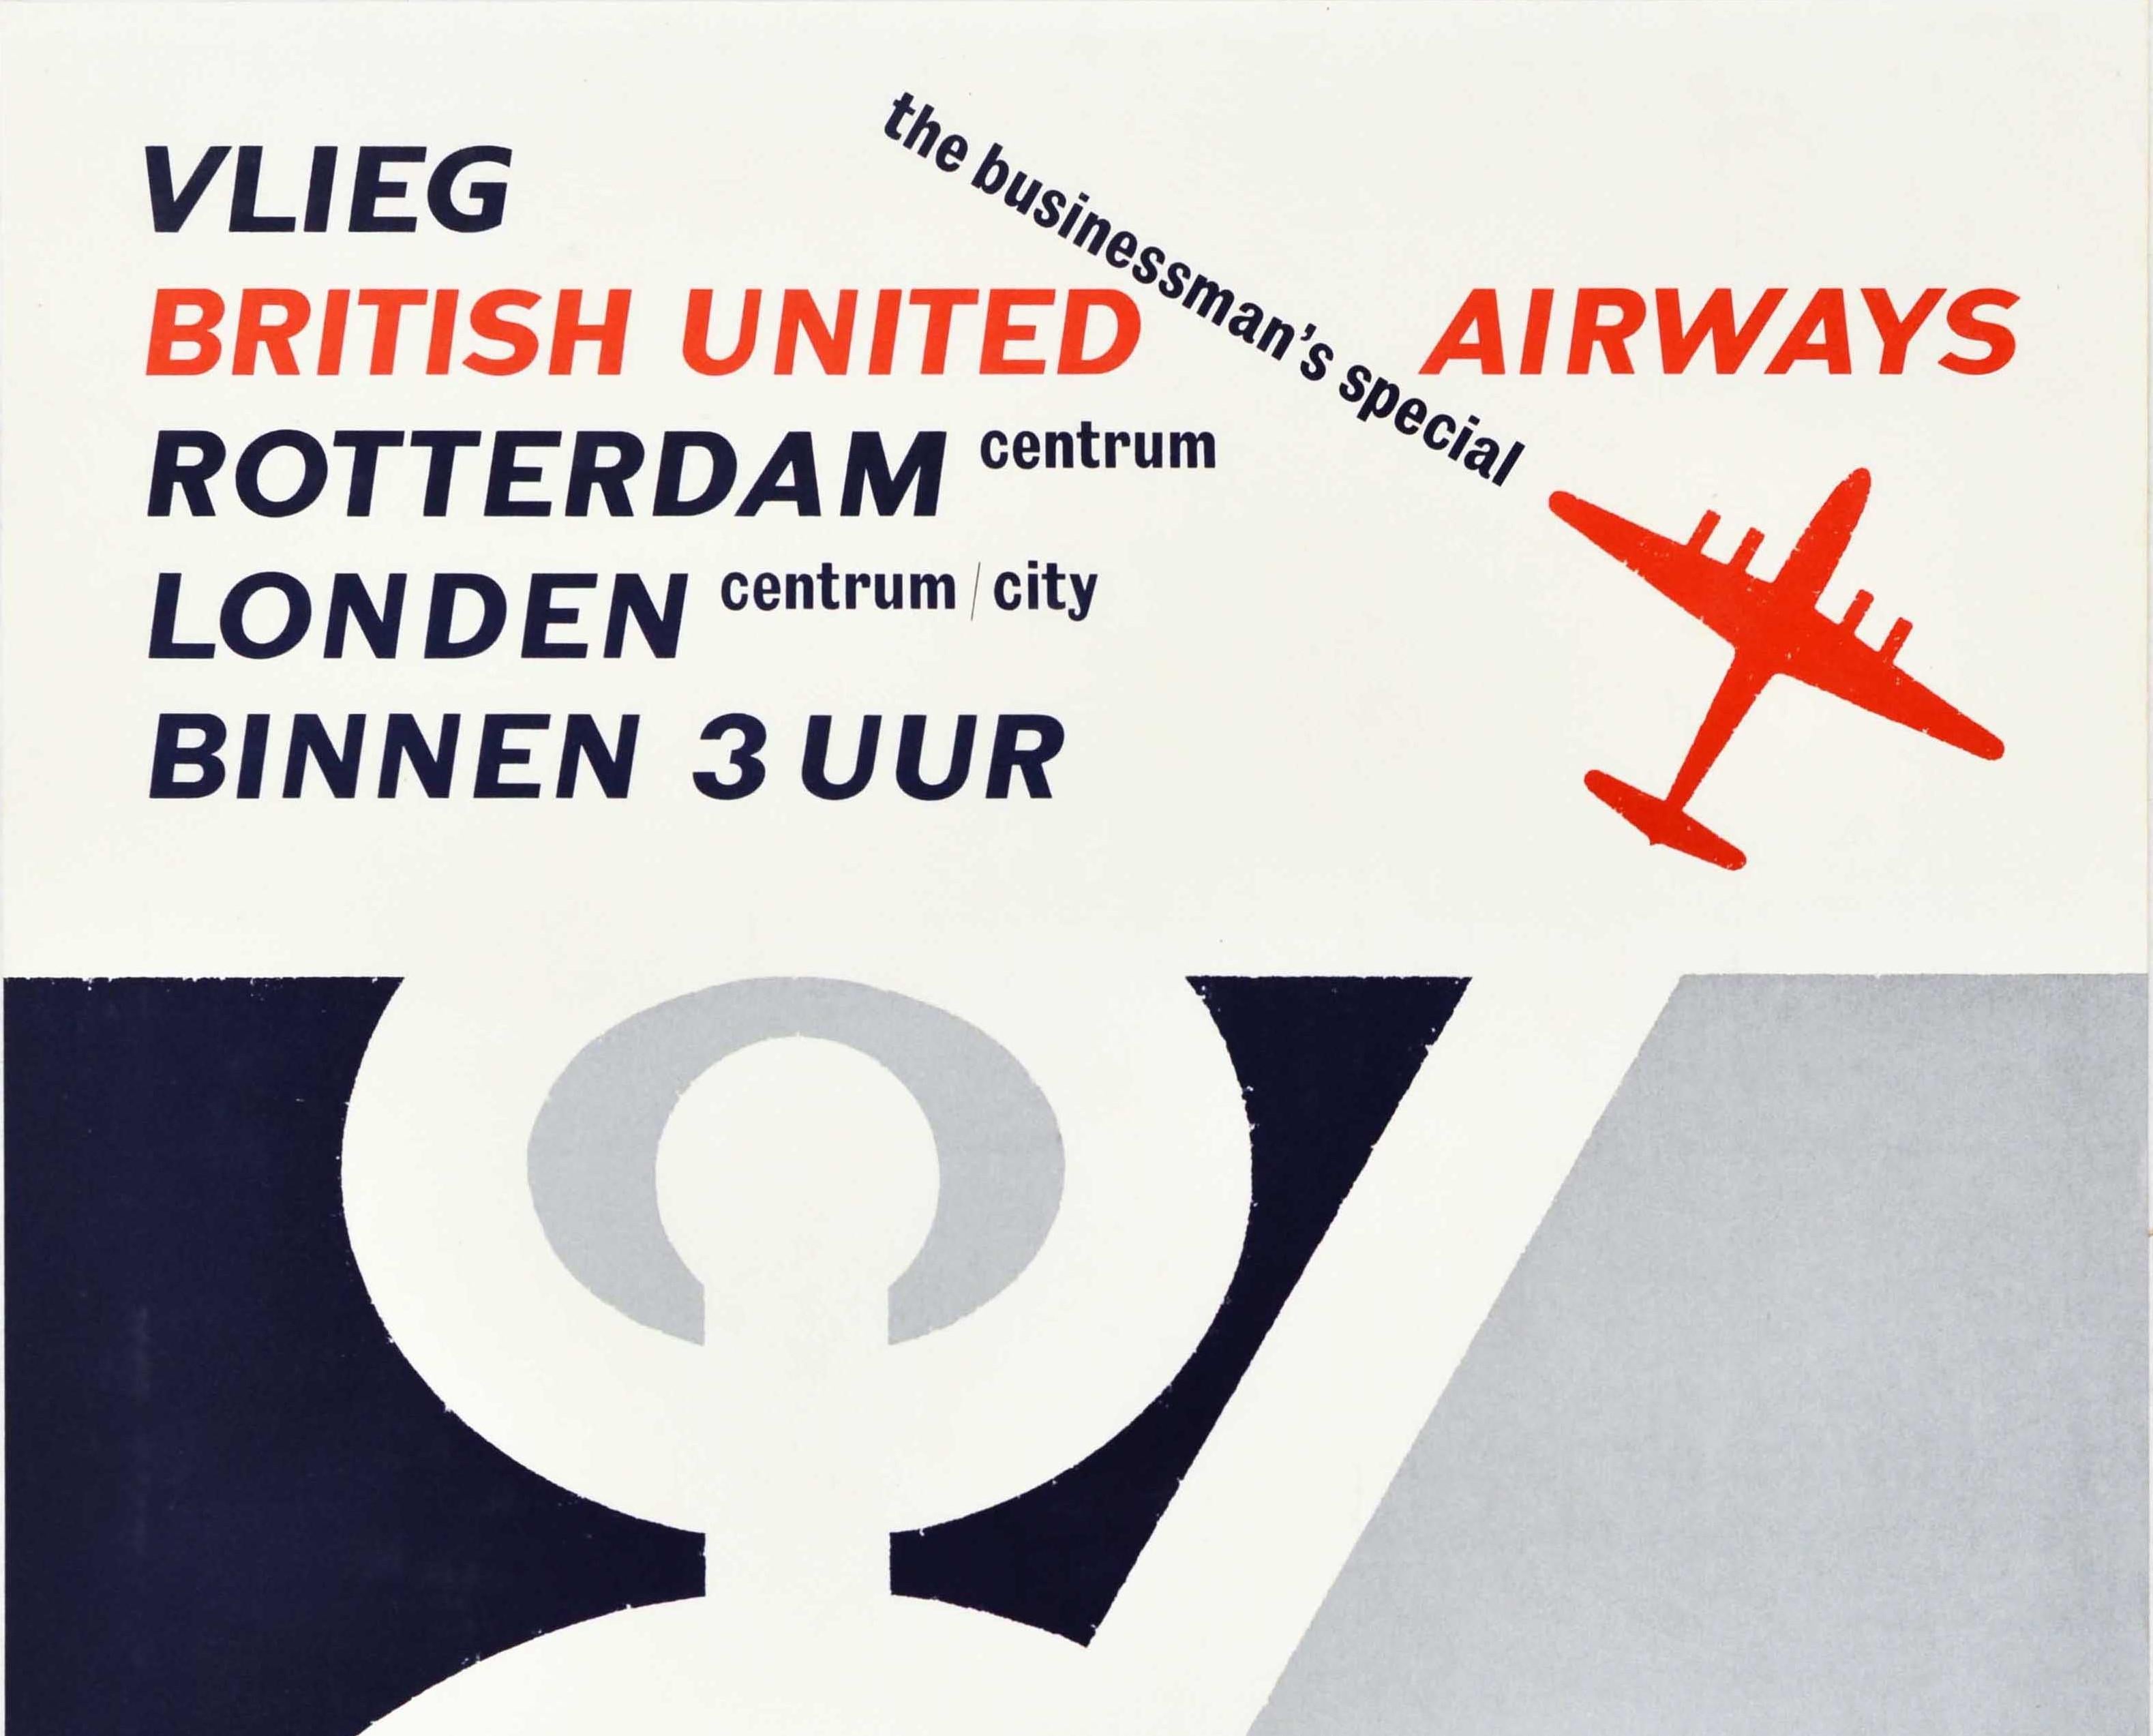 Original vintage travel poster for British United Airways - Rotterdam centre to London centre / city within 3 hours The businessman's special - featuring a great graphic design showing a stopwatch with three hours marked on the clock face and a